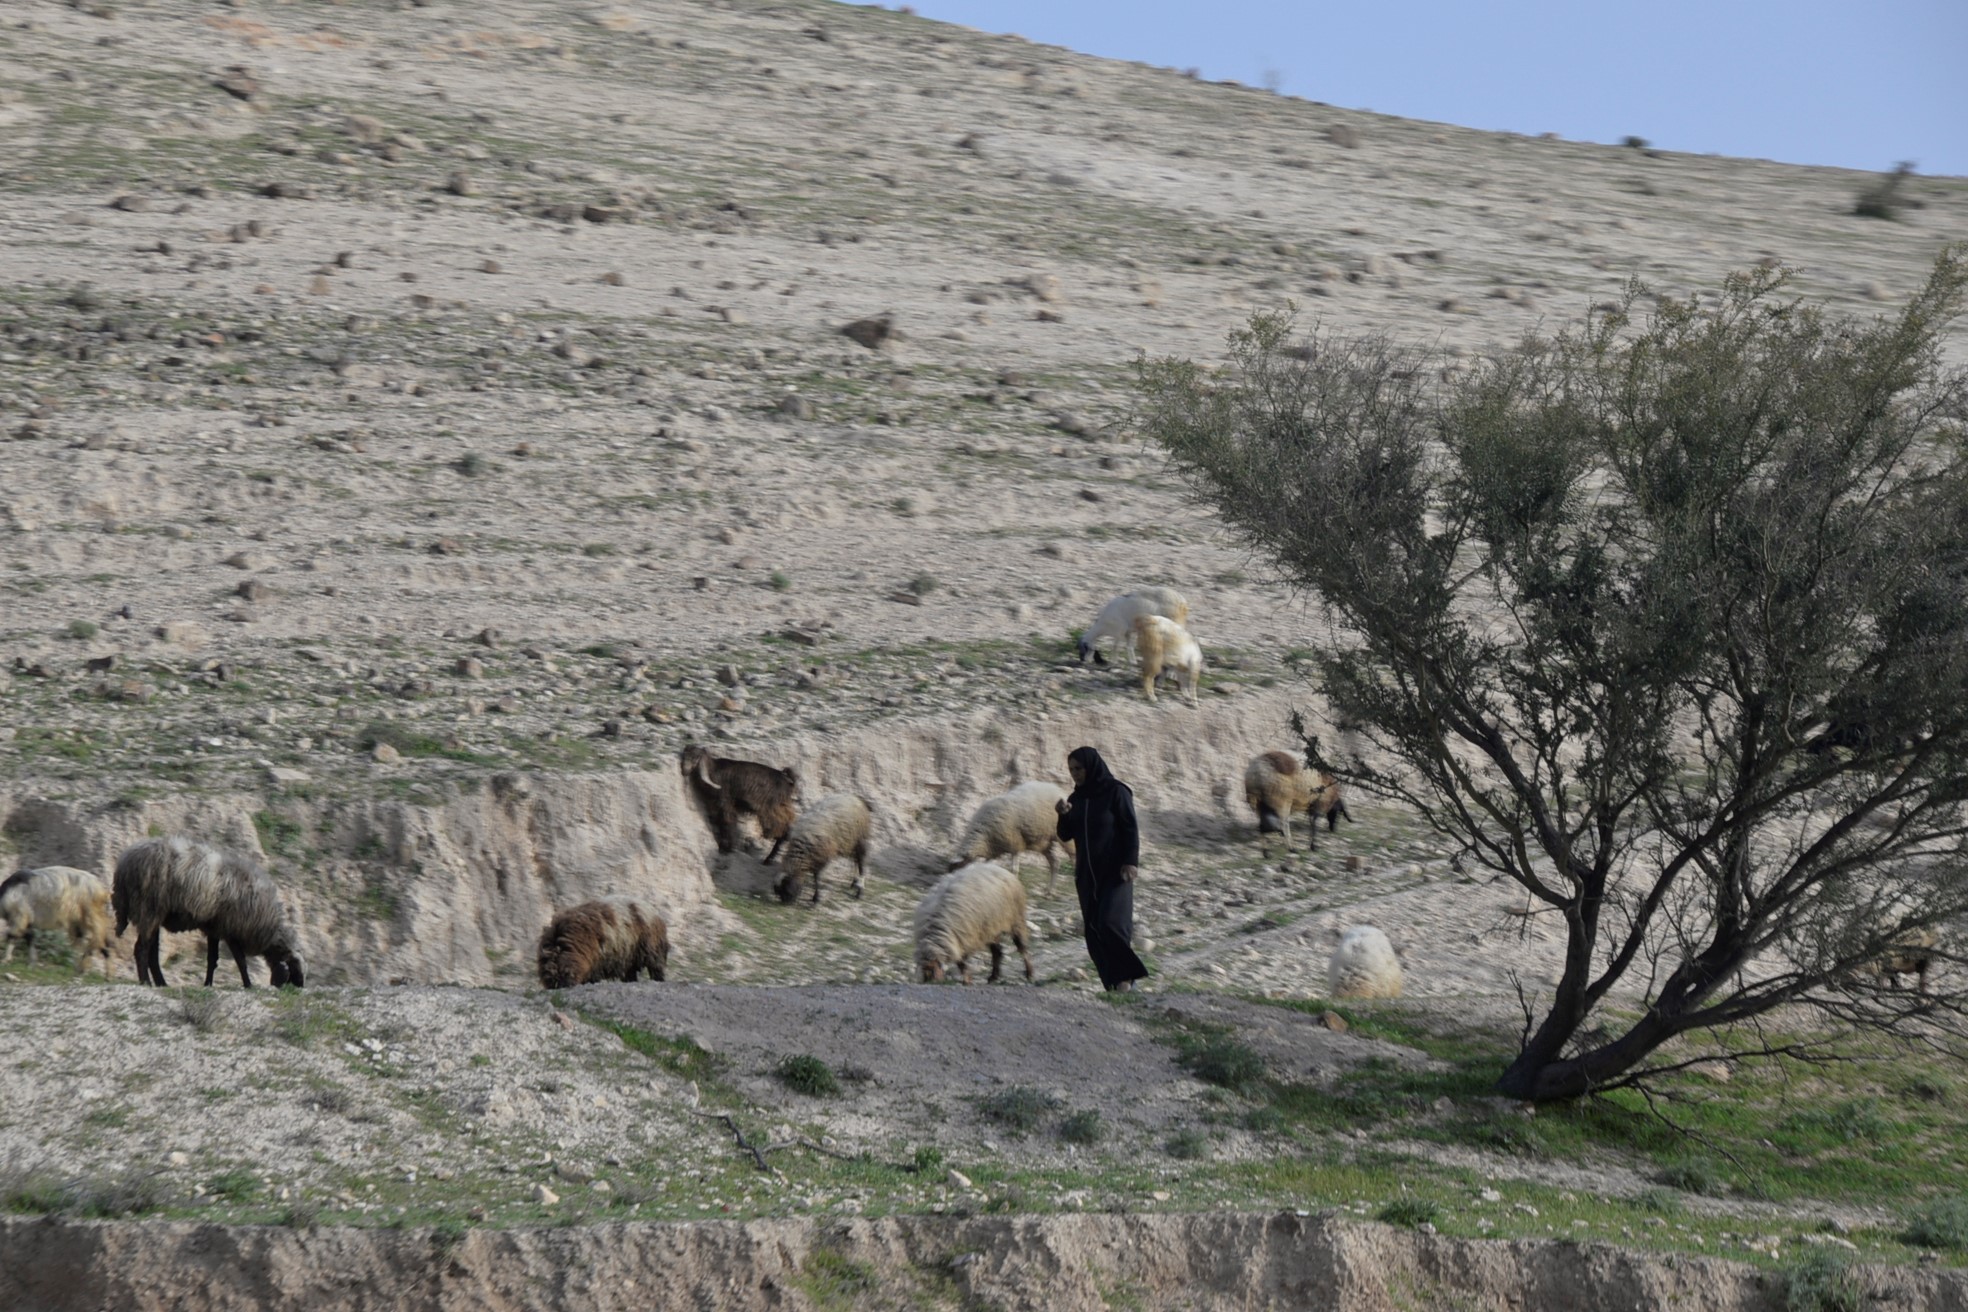 We headed east, back through the Wilderness of Judea, where we saw lots more sheep and shepherds.